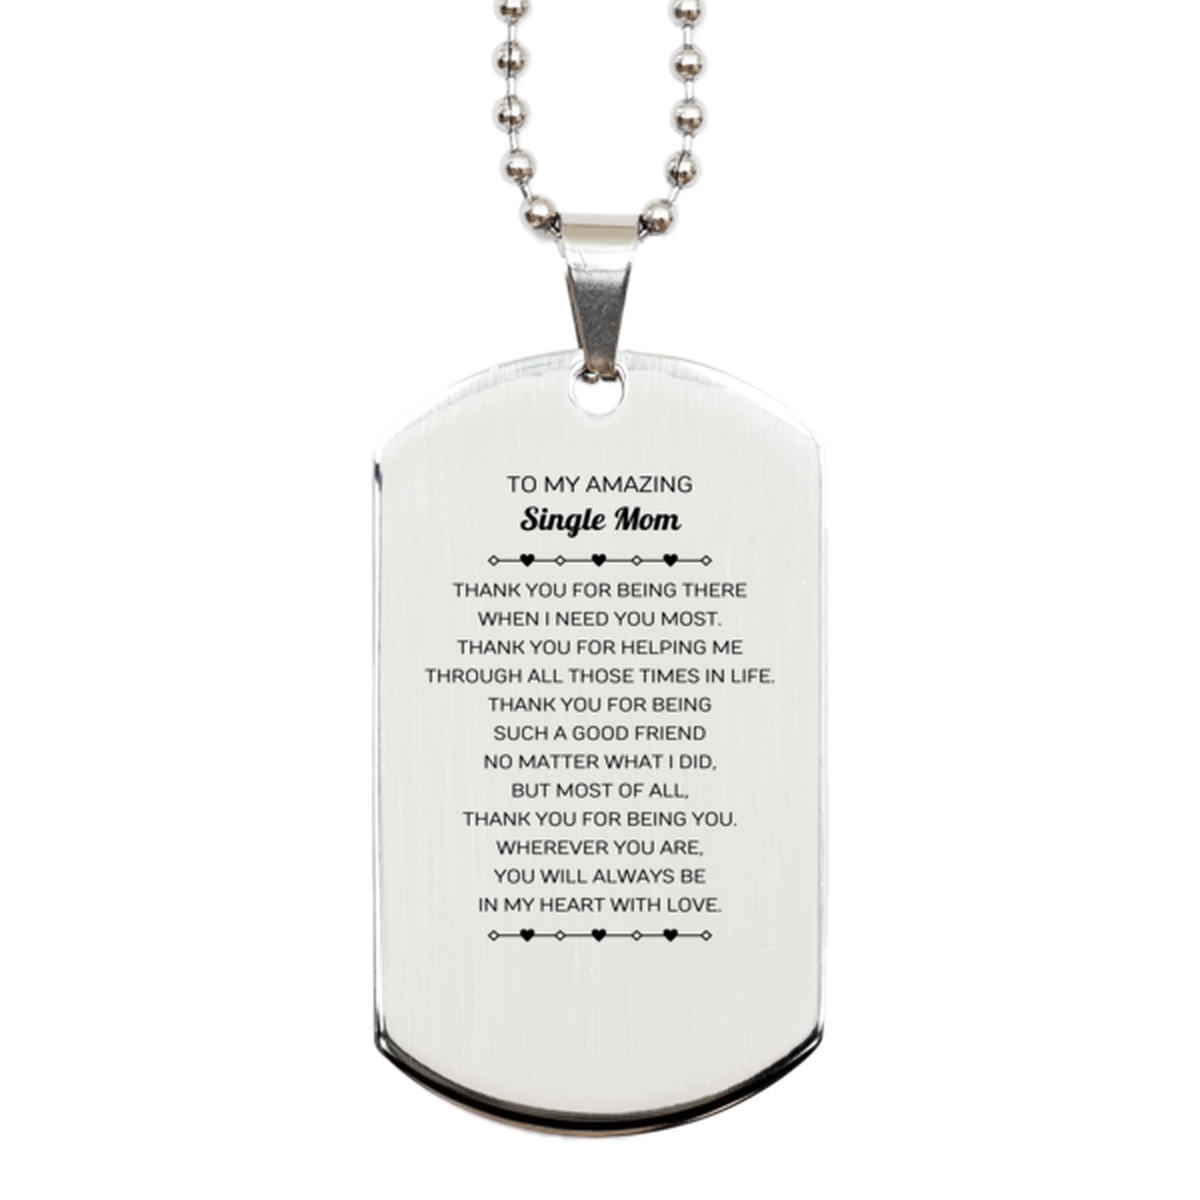 To My Amazing Single Mom Silver Dog Tag, Thank you for being there, Thank You Gifts For Single Mom, Birthday, Christmas Unique Gifts For Single Mom